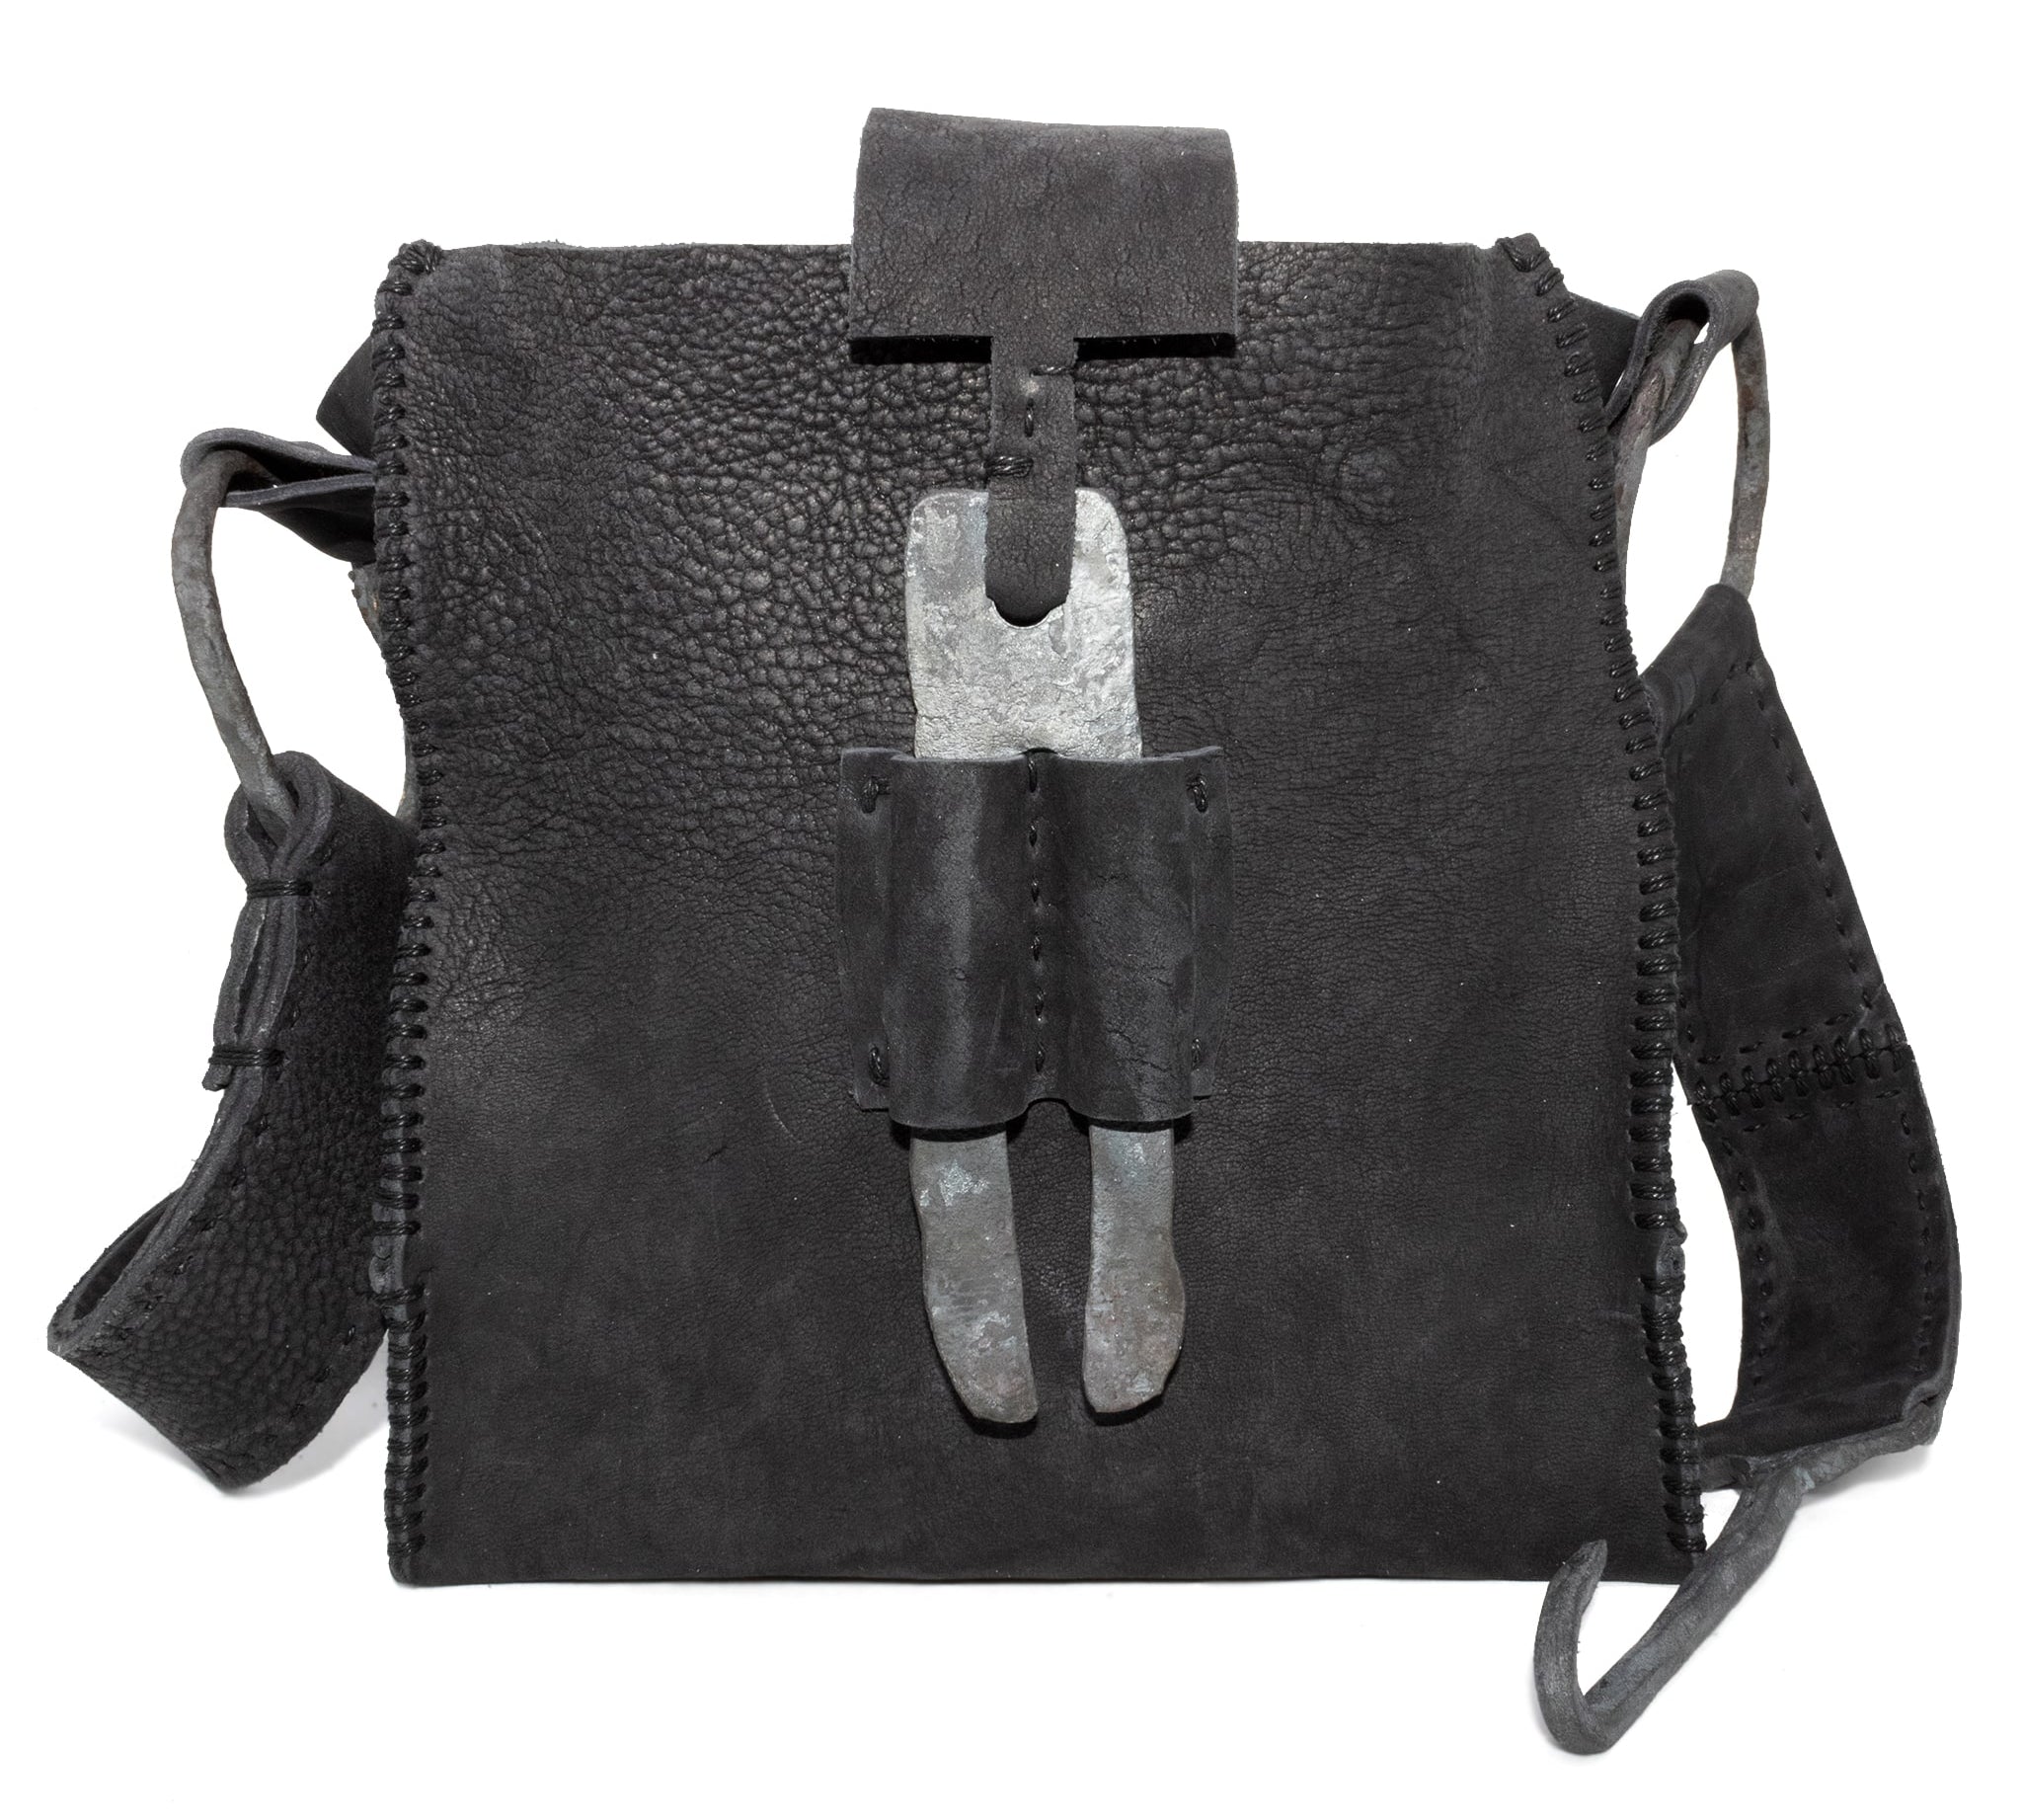 avant garde hand sewn leather shoulder bags from atelier skn.